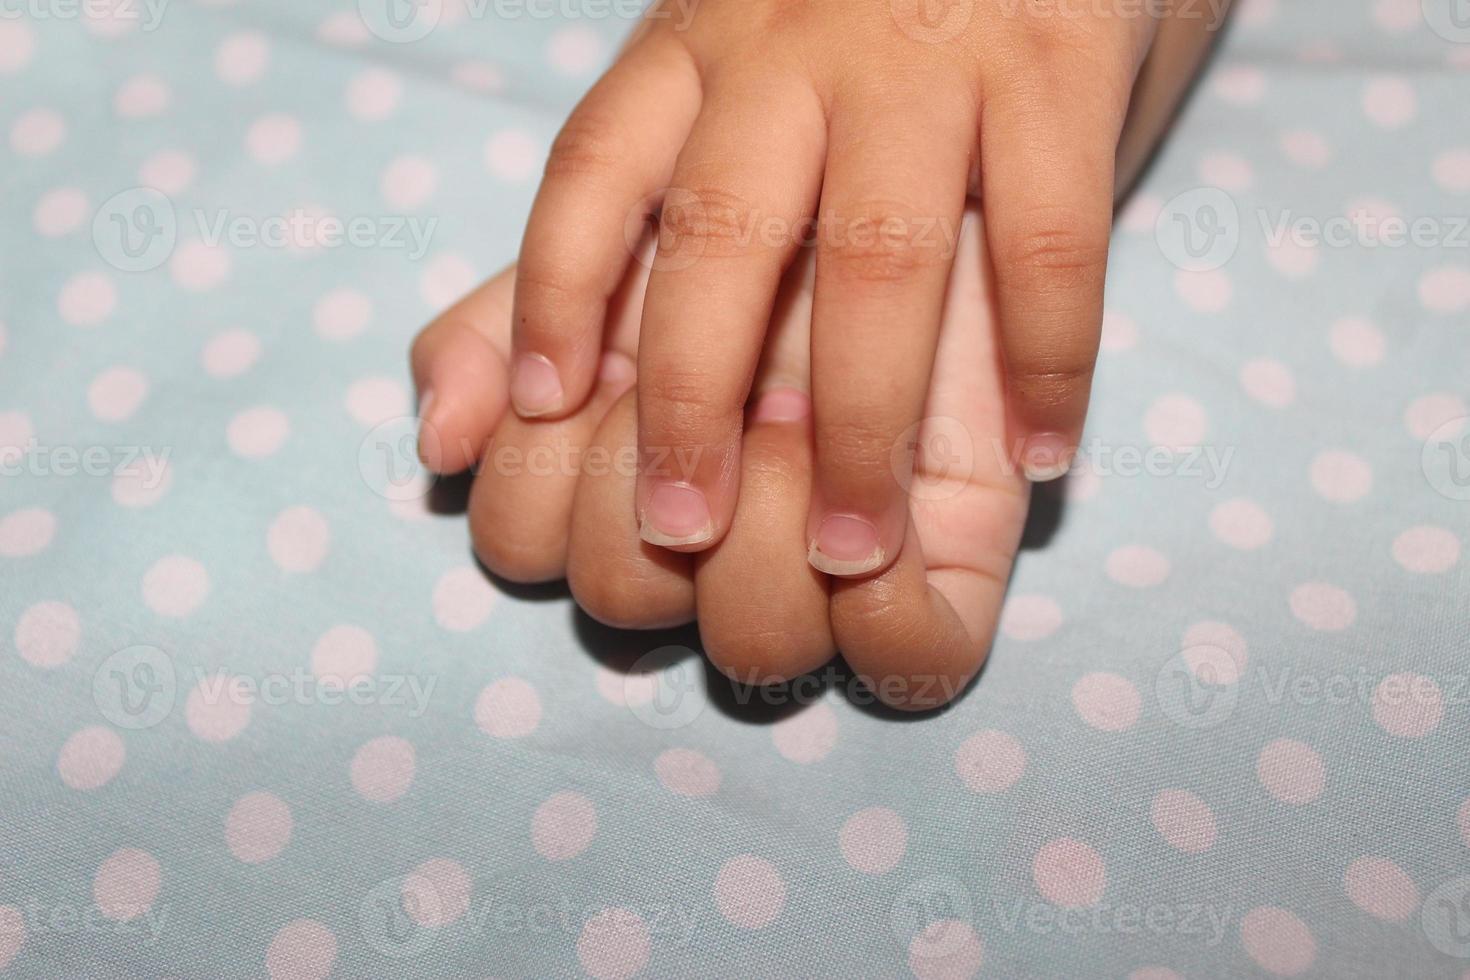 11 month old baby's nails are long, a small part of the nails are broken  and there is dirt because they haven't been clipped. 13901028 Stock Photo  at Vecteezy